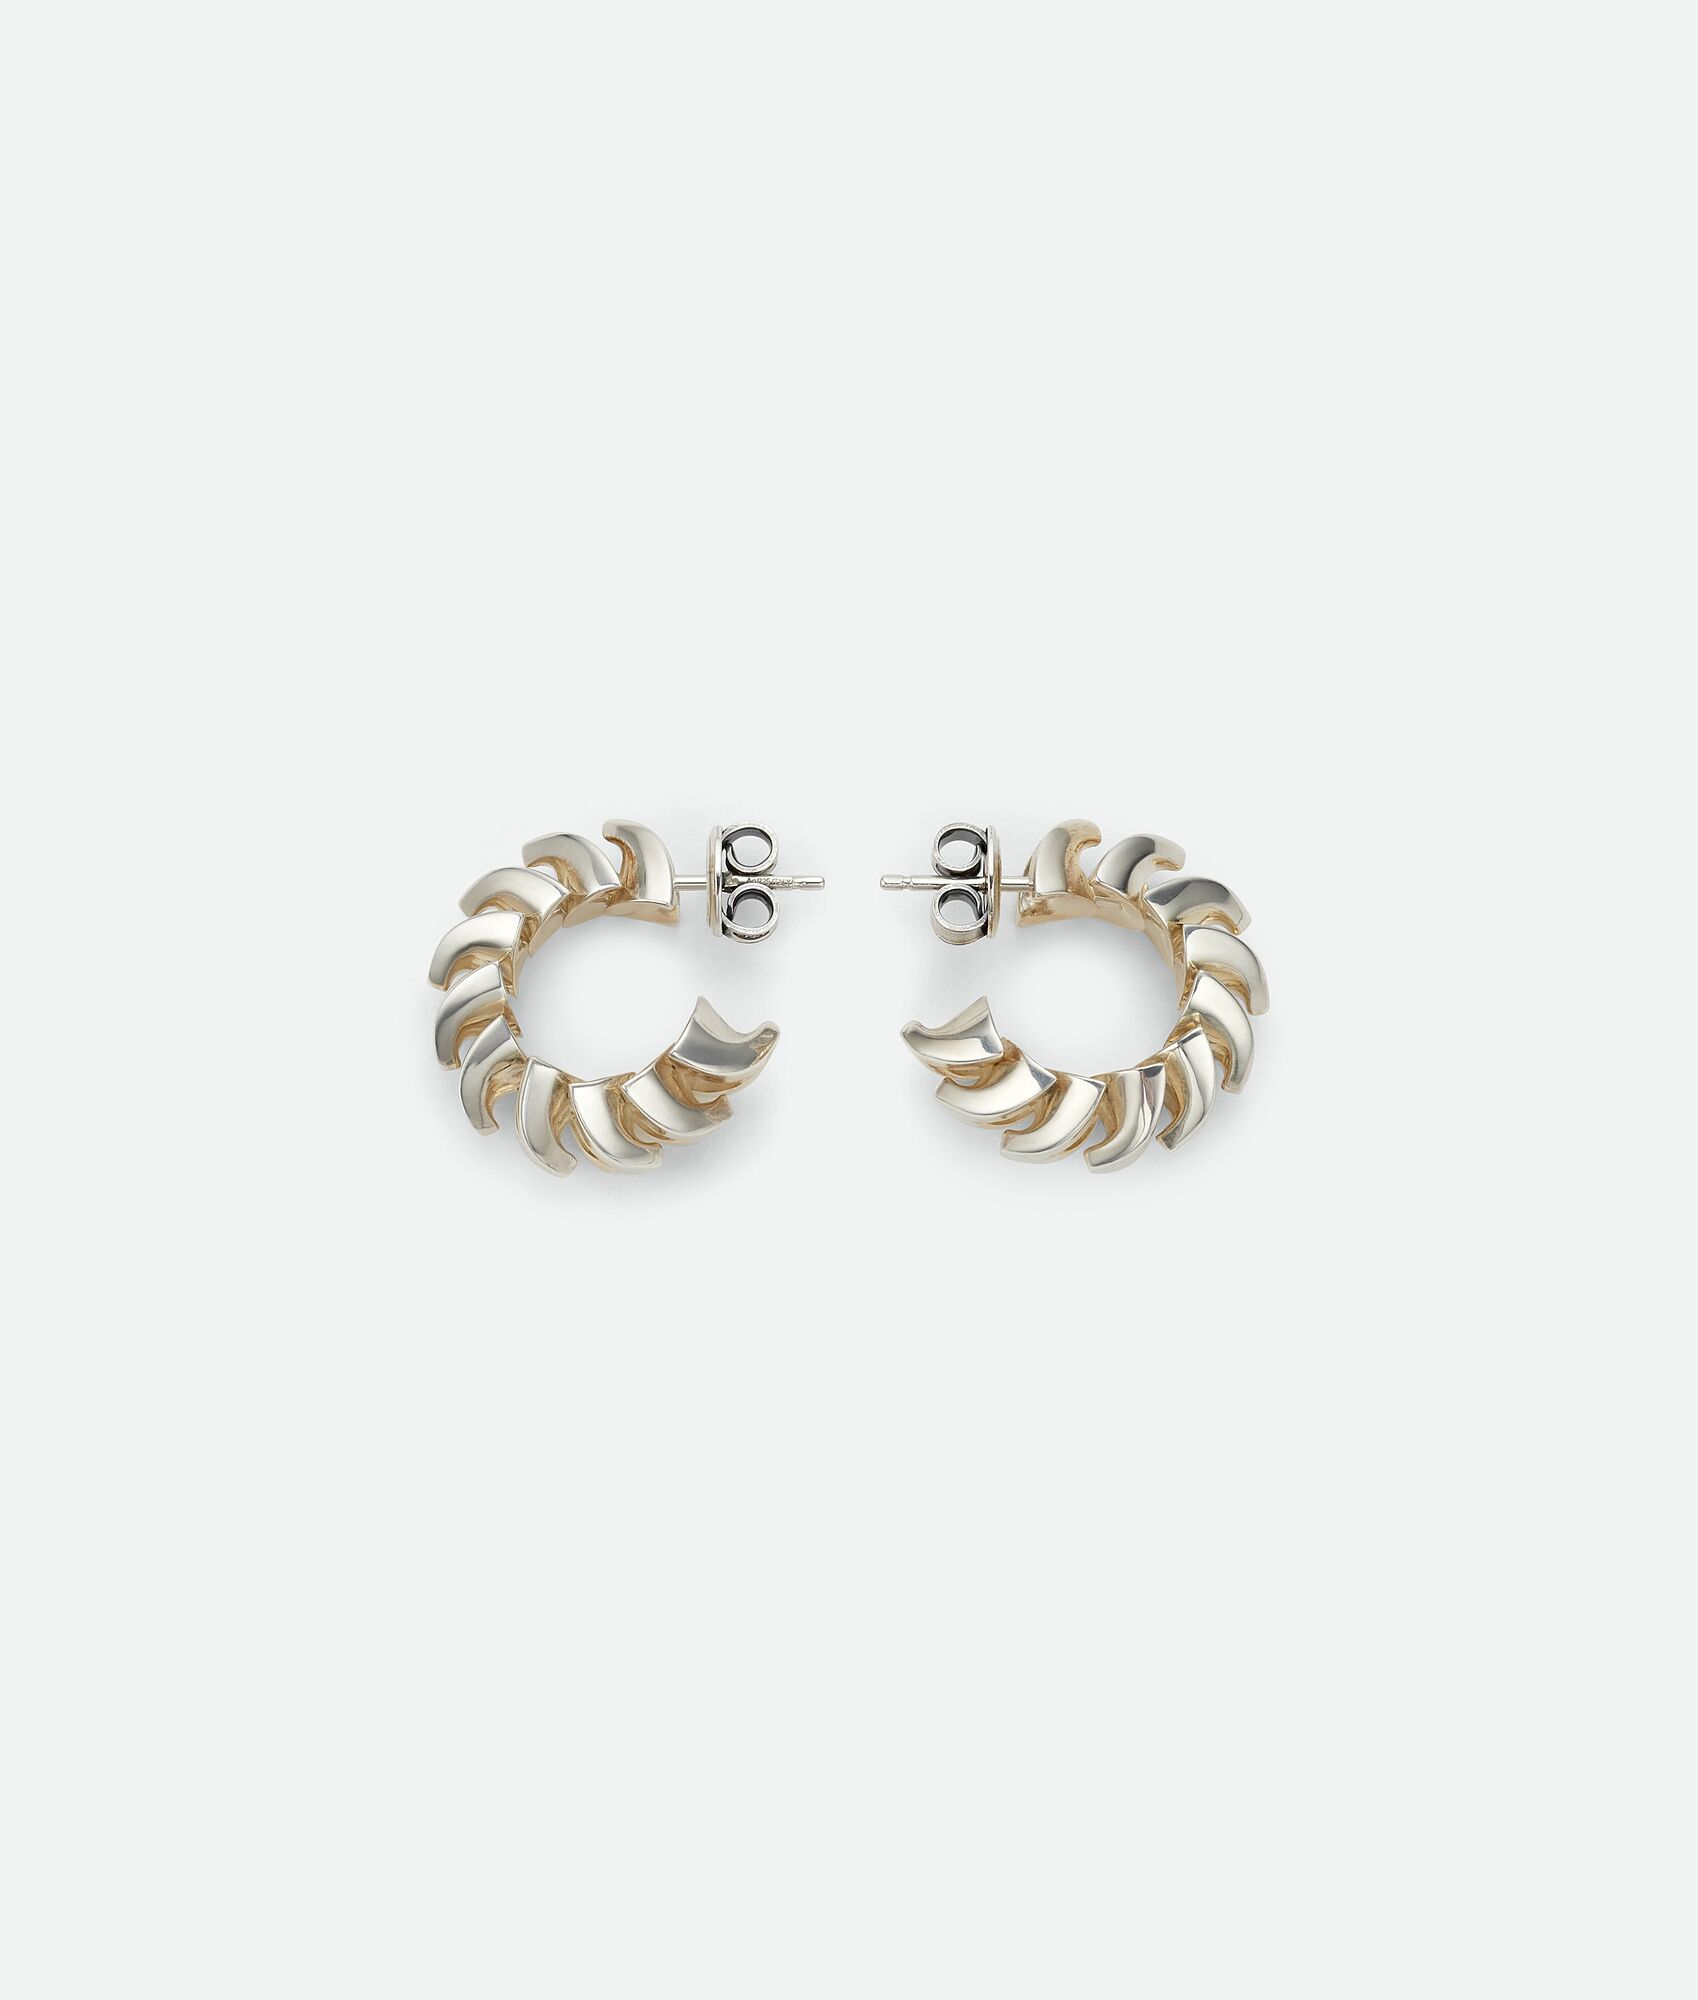 SPUNKYCHARMS Bottega Dupes Drop Earrings Dupes for Women Statement Style  14K Chunky Small Gold Hoops Fashion Jewelry Gift